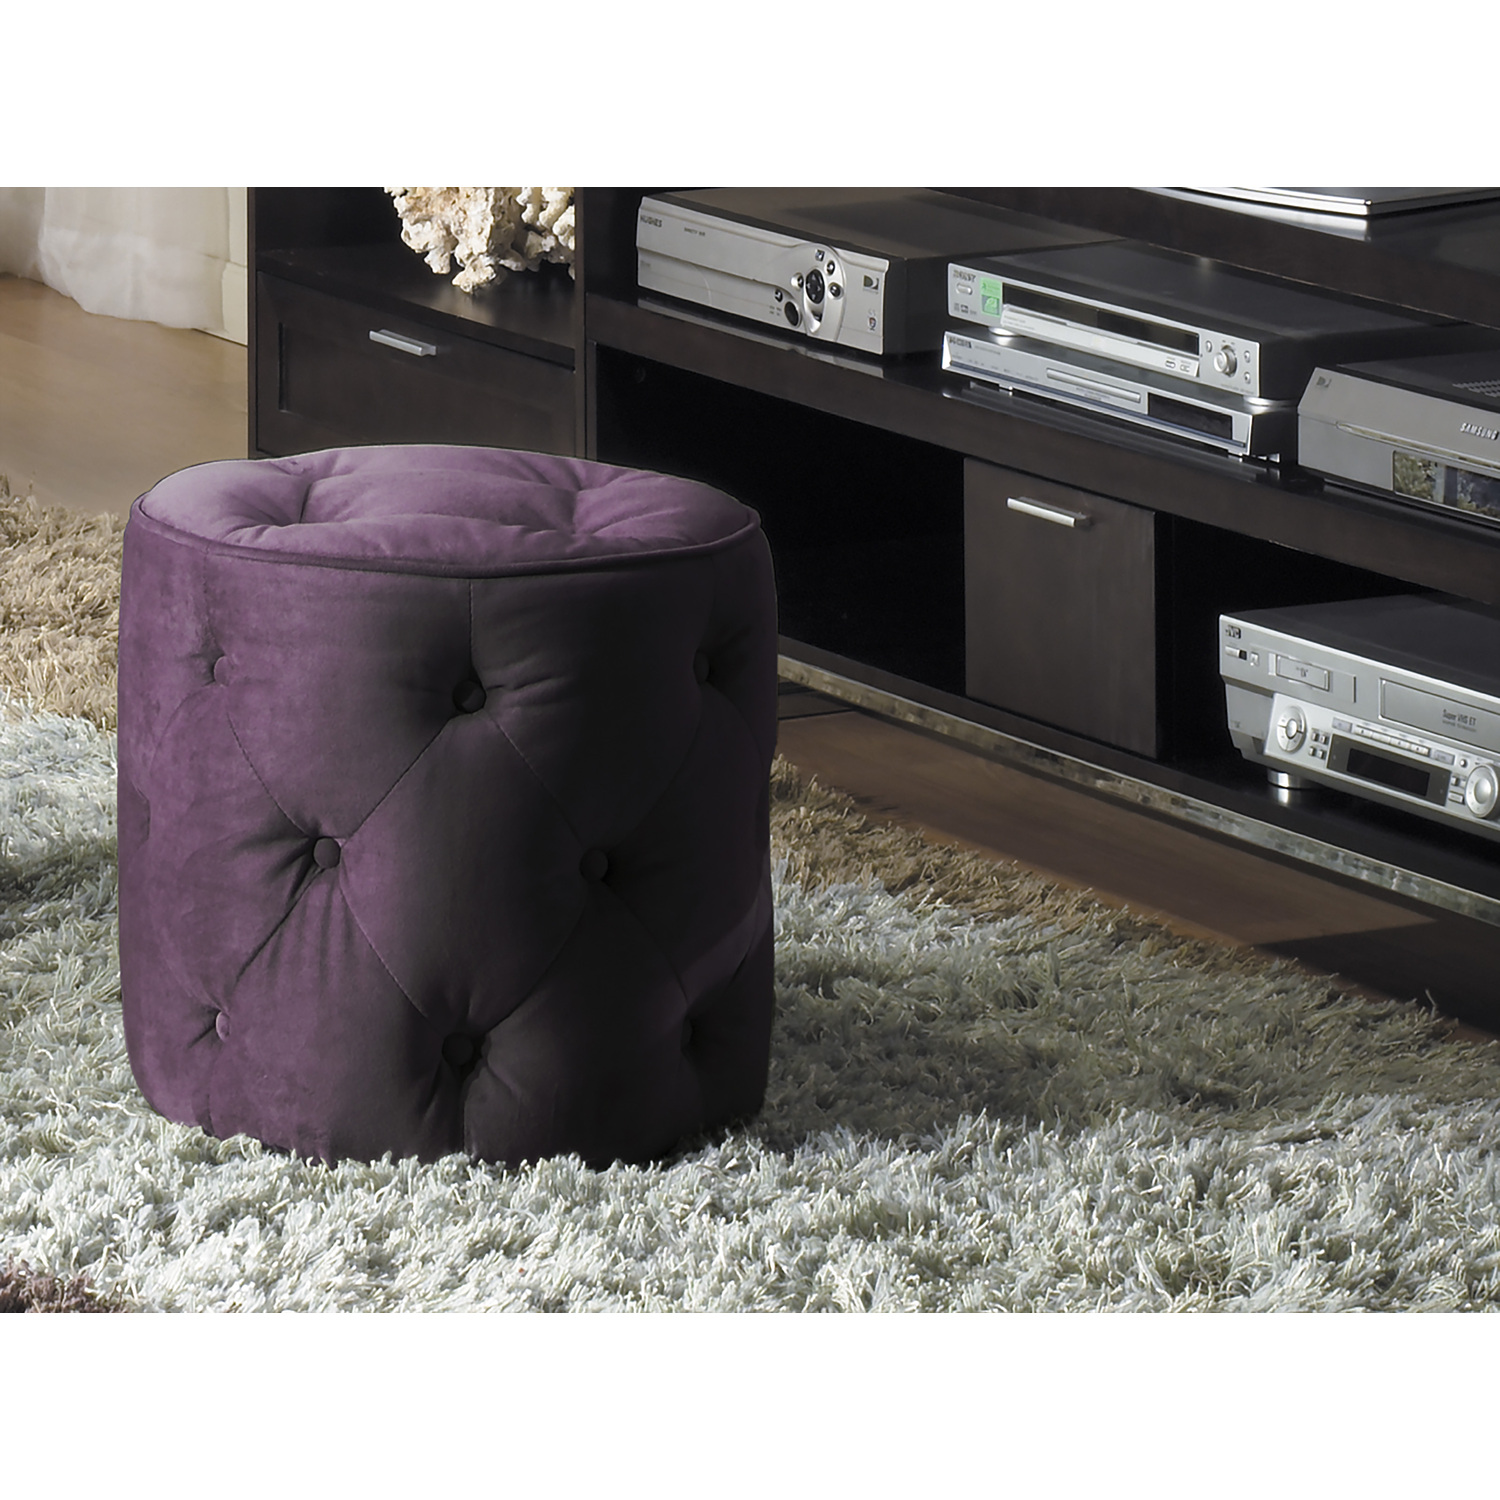 OSP Home Furnishings Curves Tufted Round Ottoman in Chocolate Velvet Fabric with Solid Wood Legs - image 2 of 2